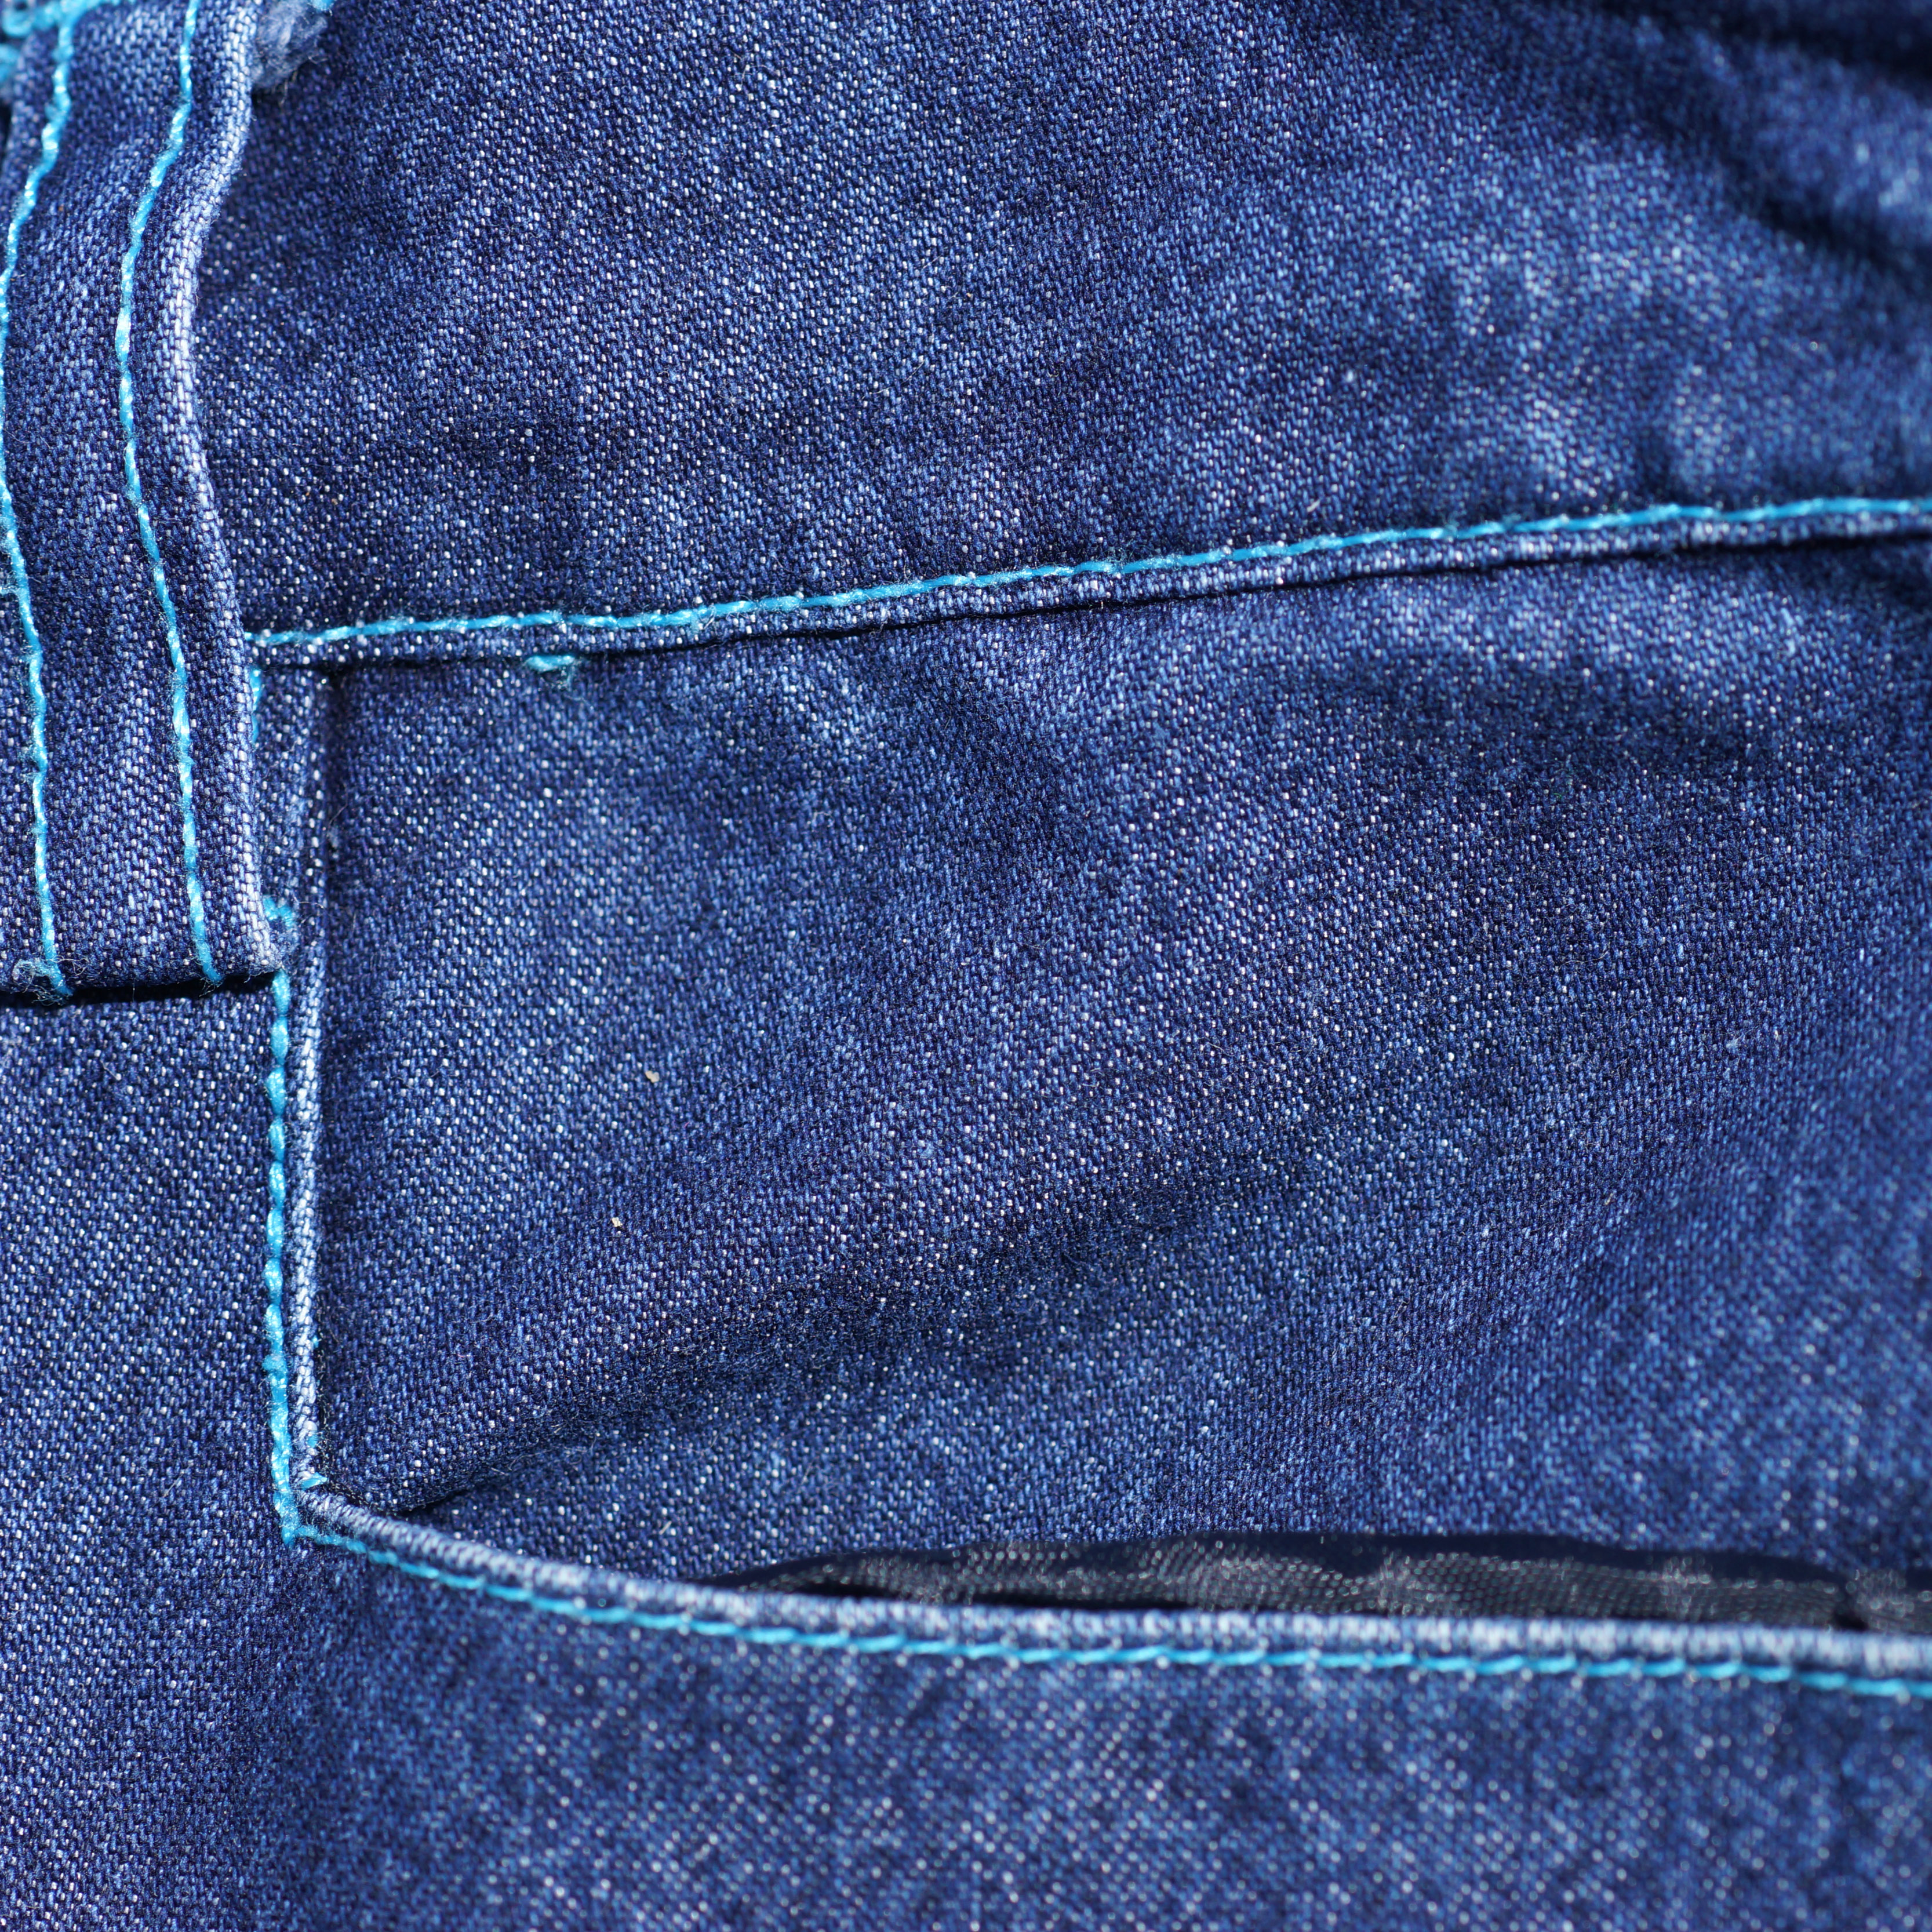 Two free denim textures from the front jean pocket